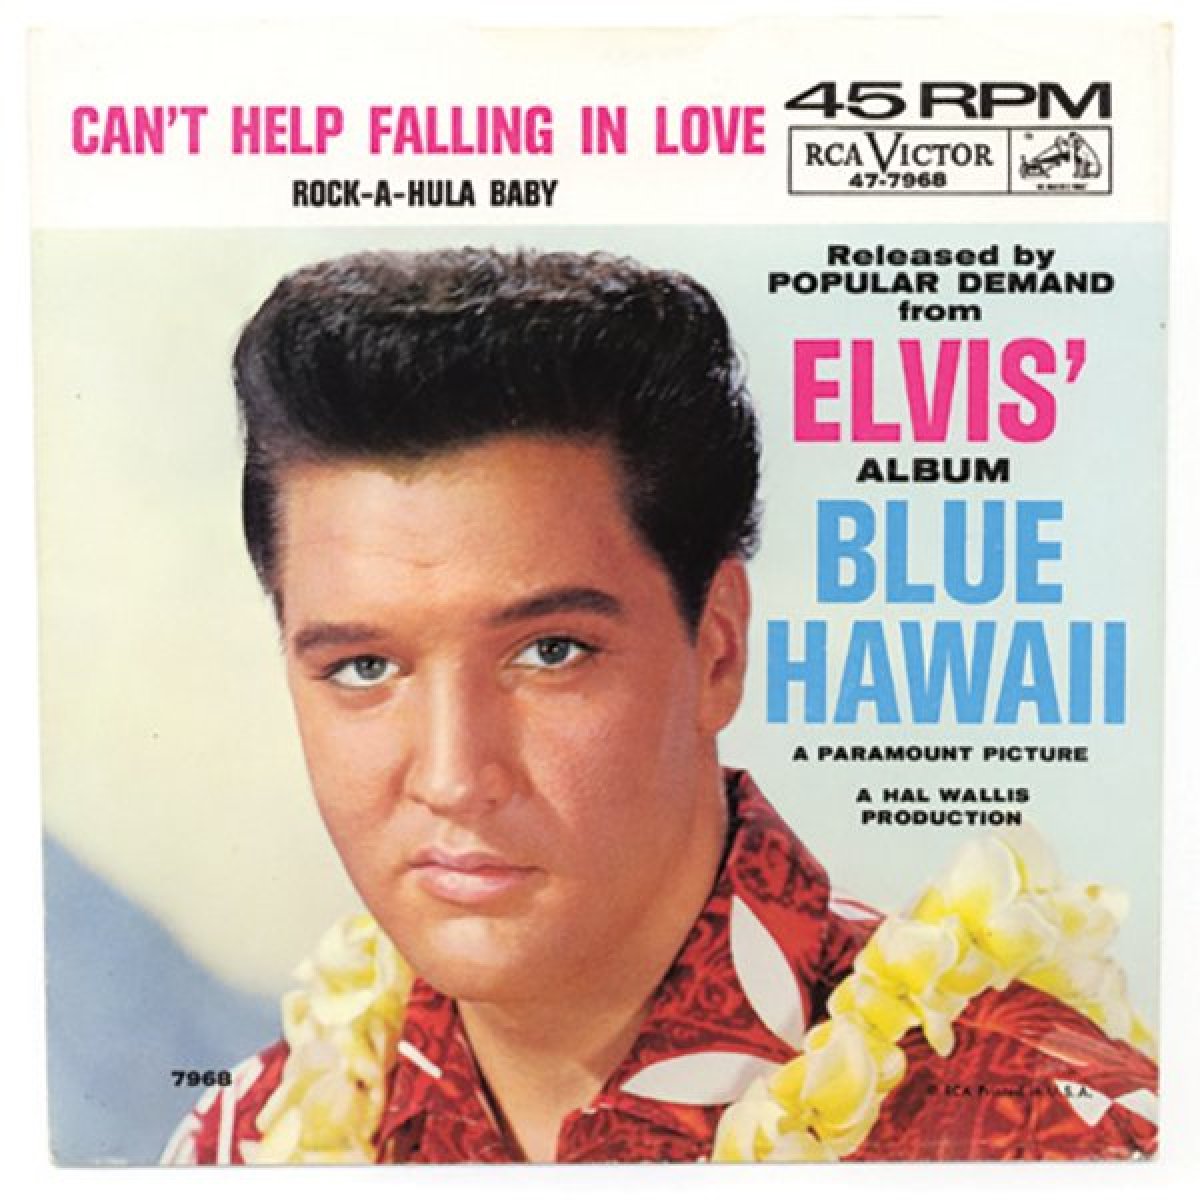 cant-help-falling-in-love-elvis-1613035649-1200-auto.jpg